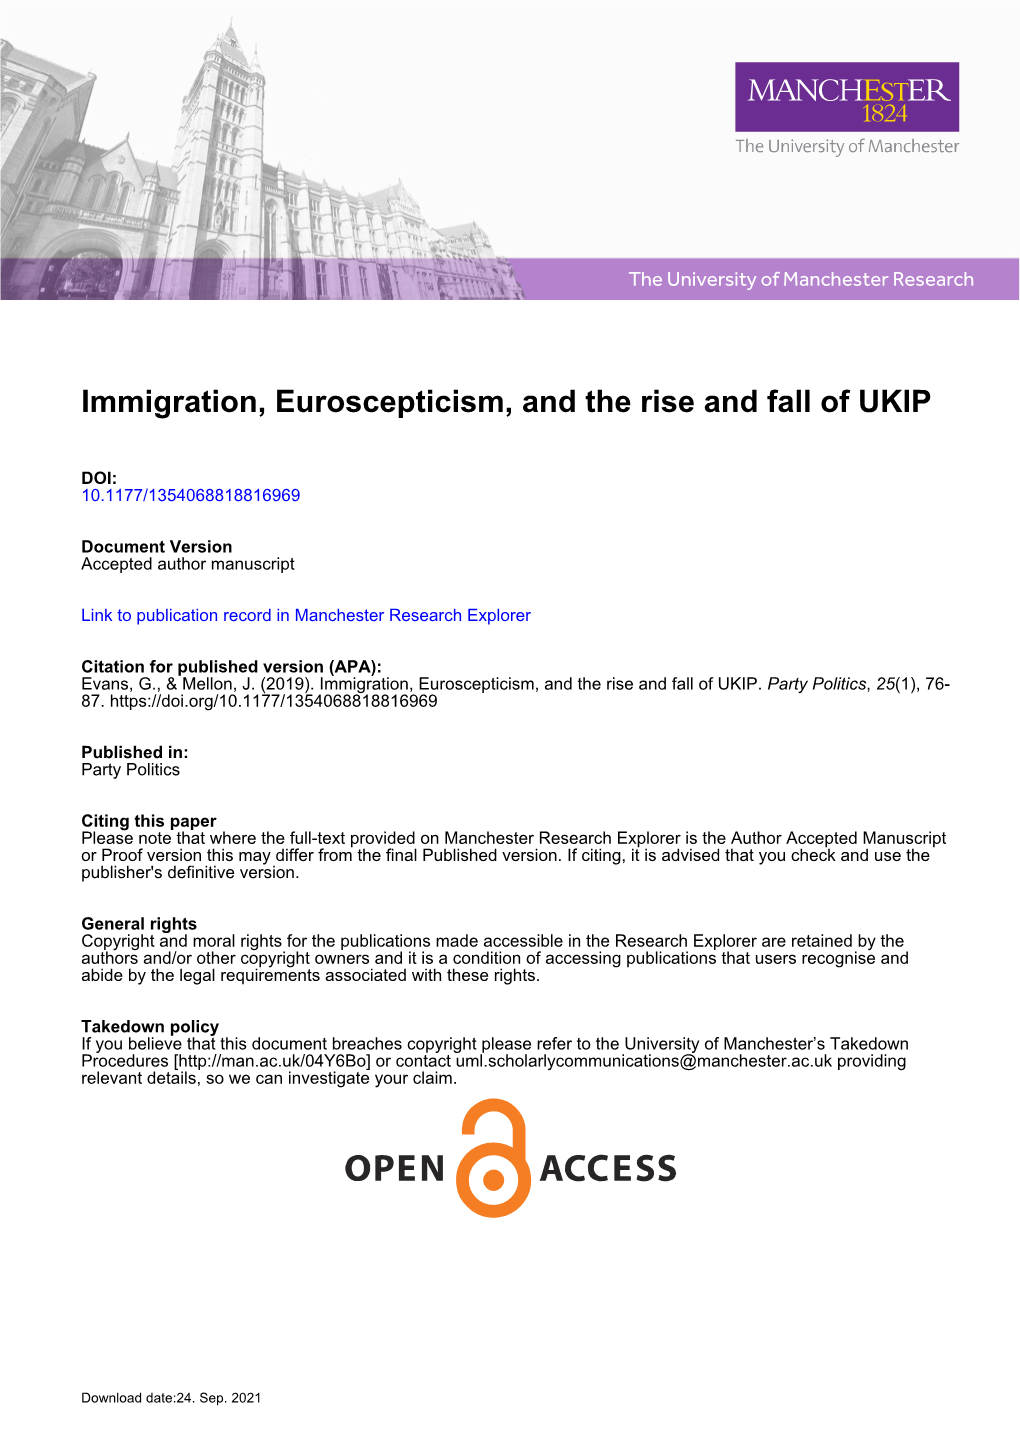 Immigration, Euroscepticism, and the Rise and Fall of UKIP